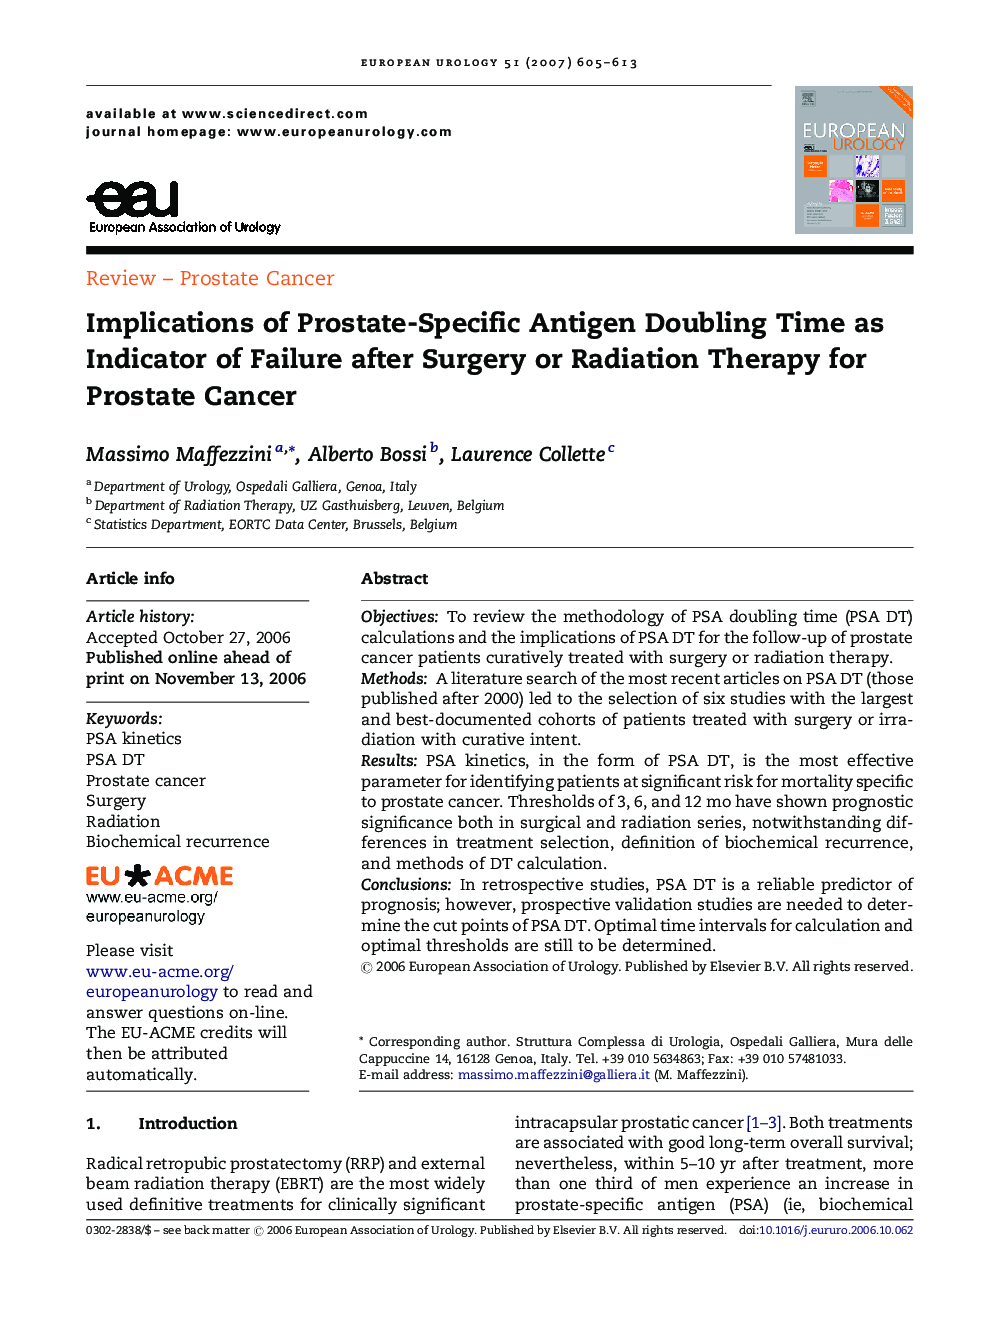 Implications of Prostate-Specific Antigen Doubling Time as Indicator of Failure after Surgery or Radiation Therapy for Prostate Cancer 